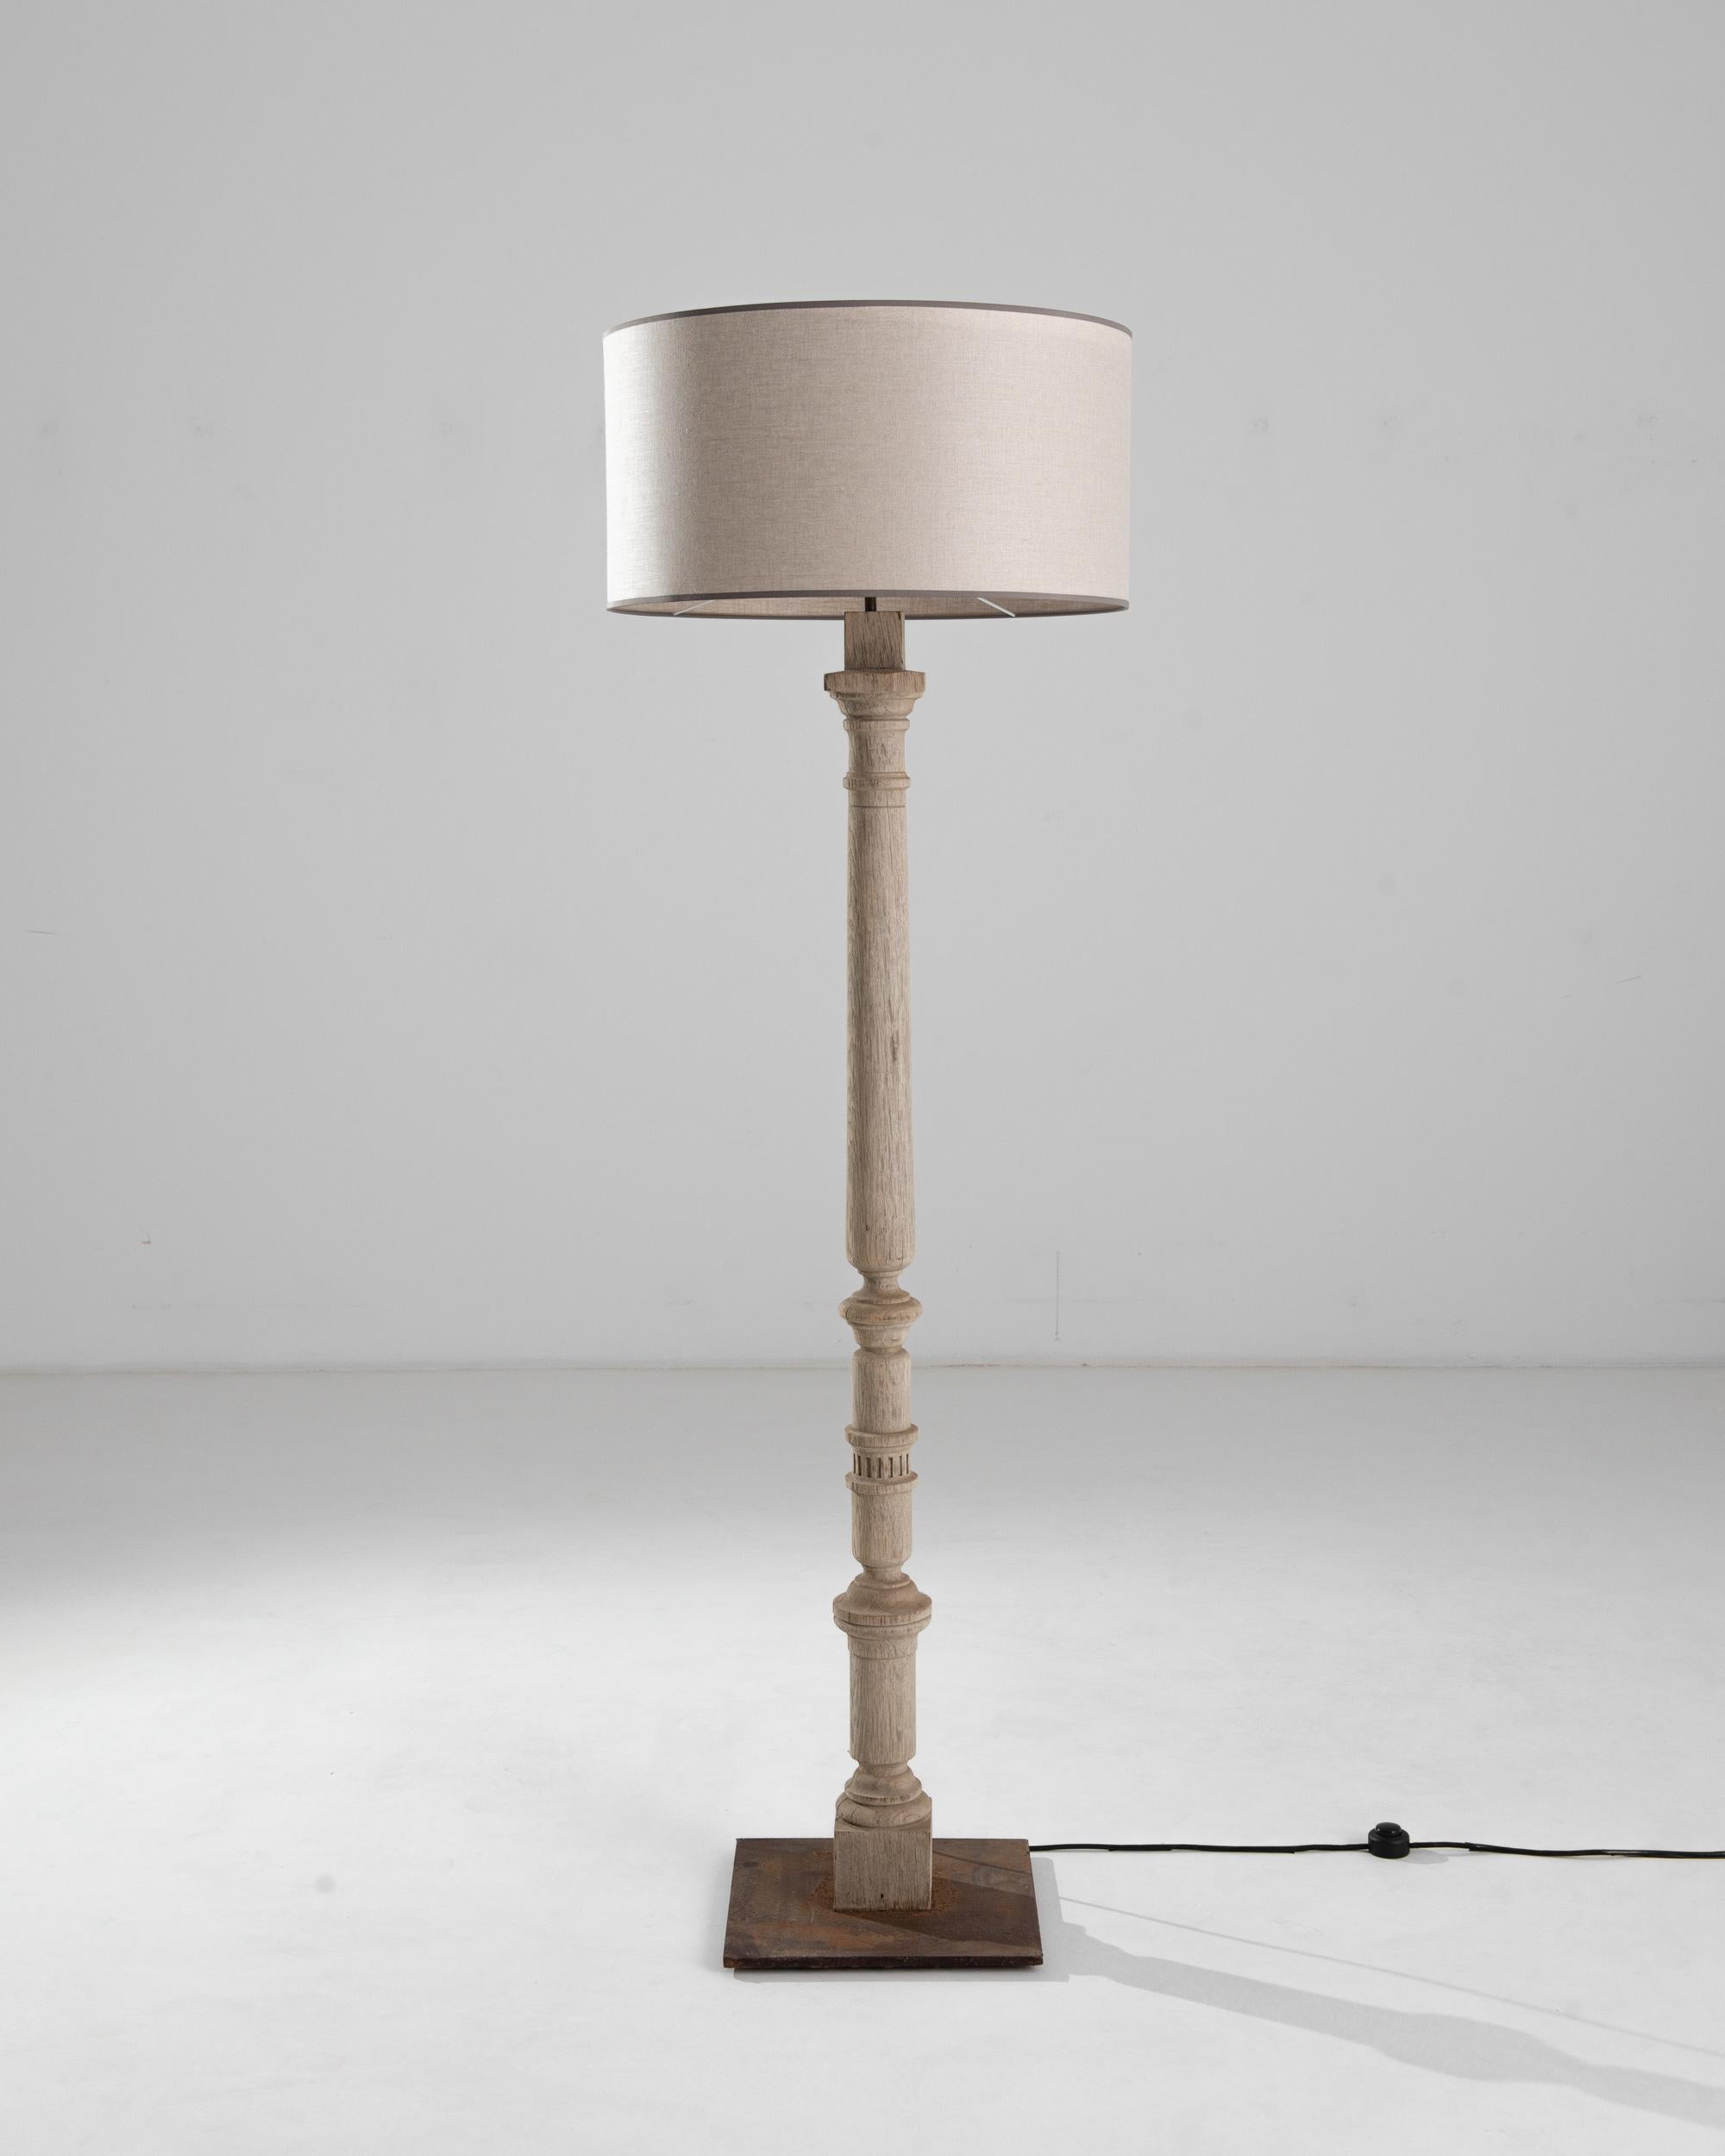 This oak floor lamp was produced in France during the turn of the century. Elevated to nearly six feet, this tall lamp exhibits a subdued palette and soft lighting. Crowned by an updated sand colored shade with a satin finish, the turned column is